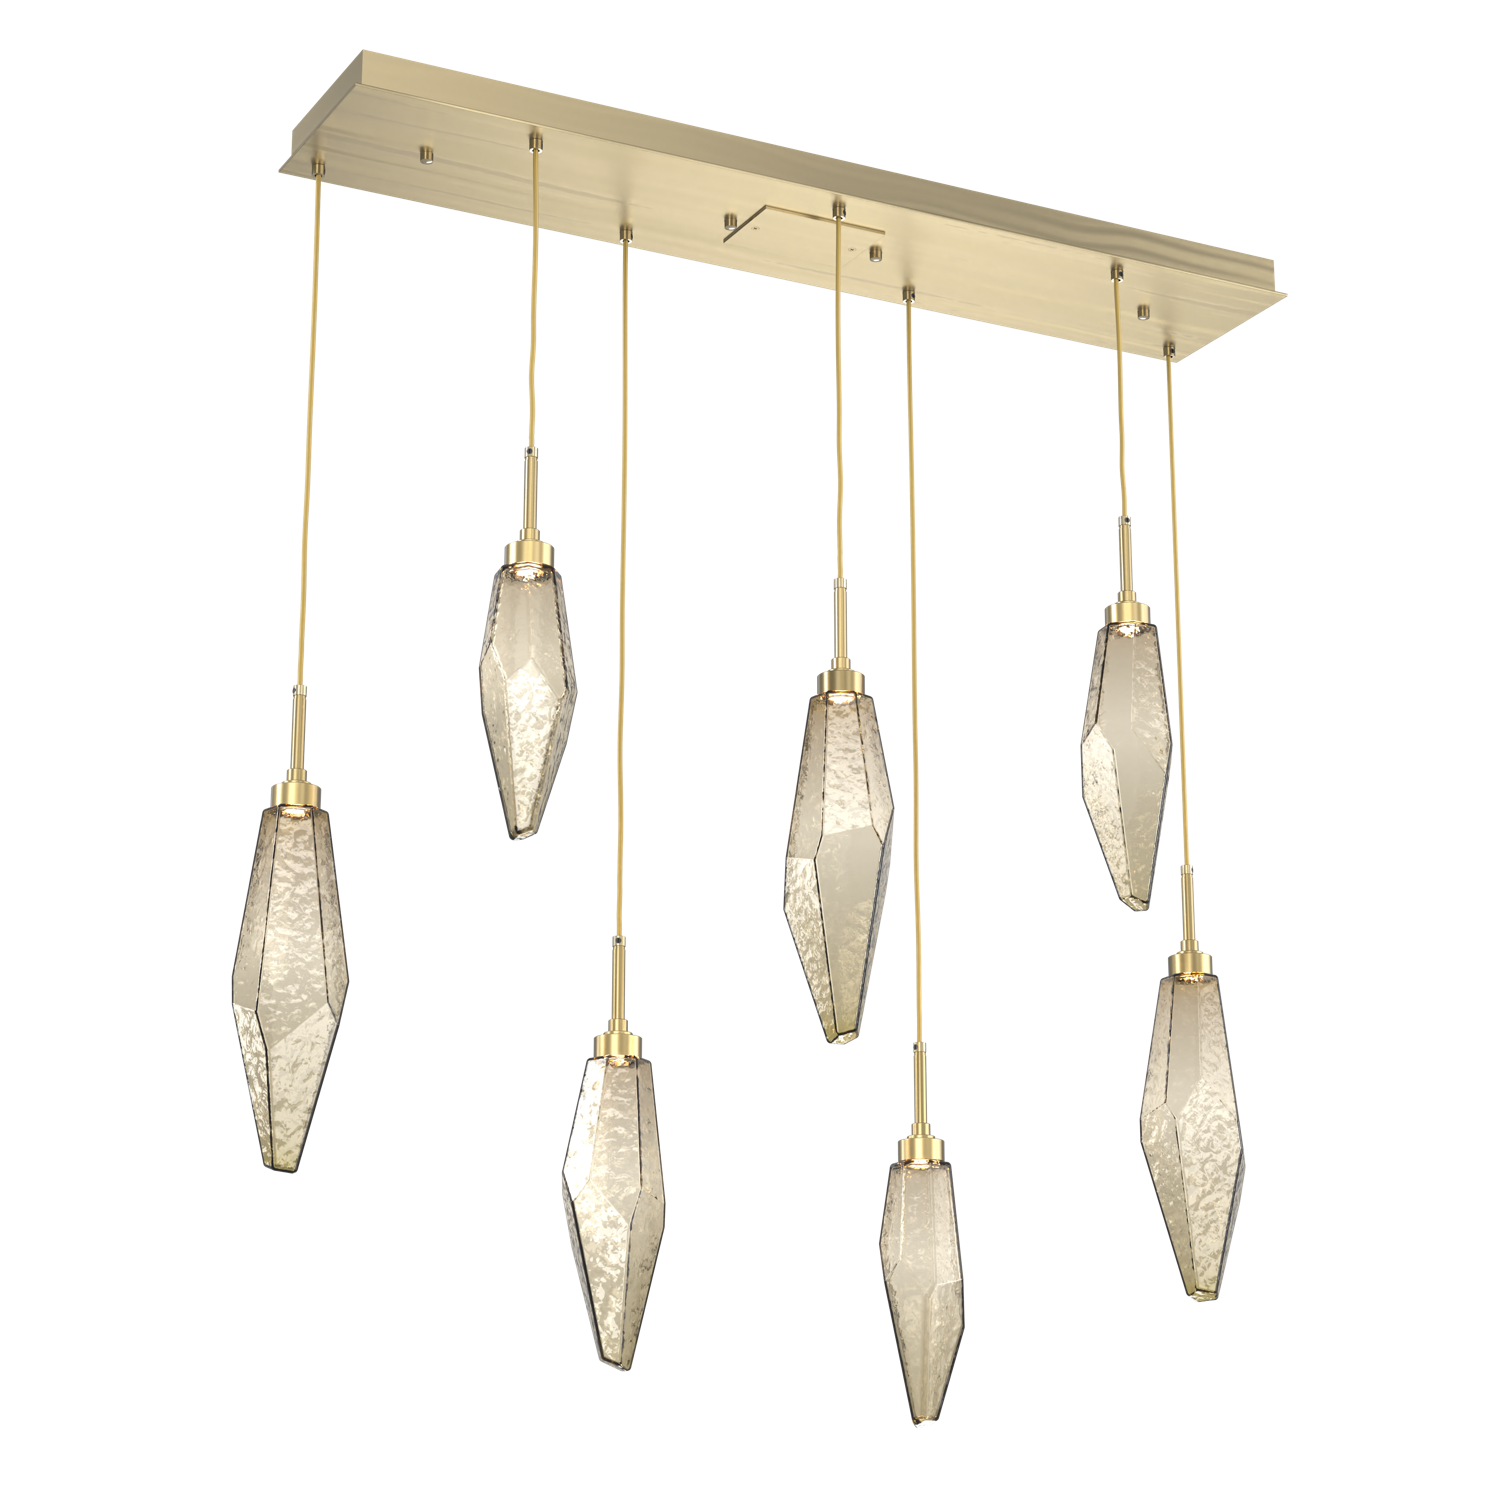 PLB0050-07-HB-CB-Hammerton-Studio-Rock-Crystal-7-light-linear-pendant-chandelier-with-heritage-brass-finish-and-chilled-bronze-blown-glass-shades-and-LED-lamping